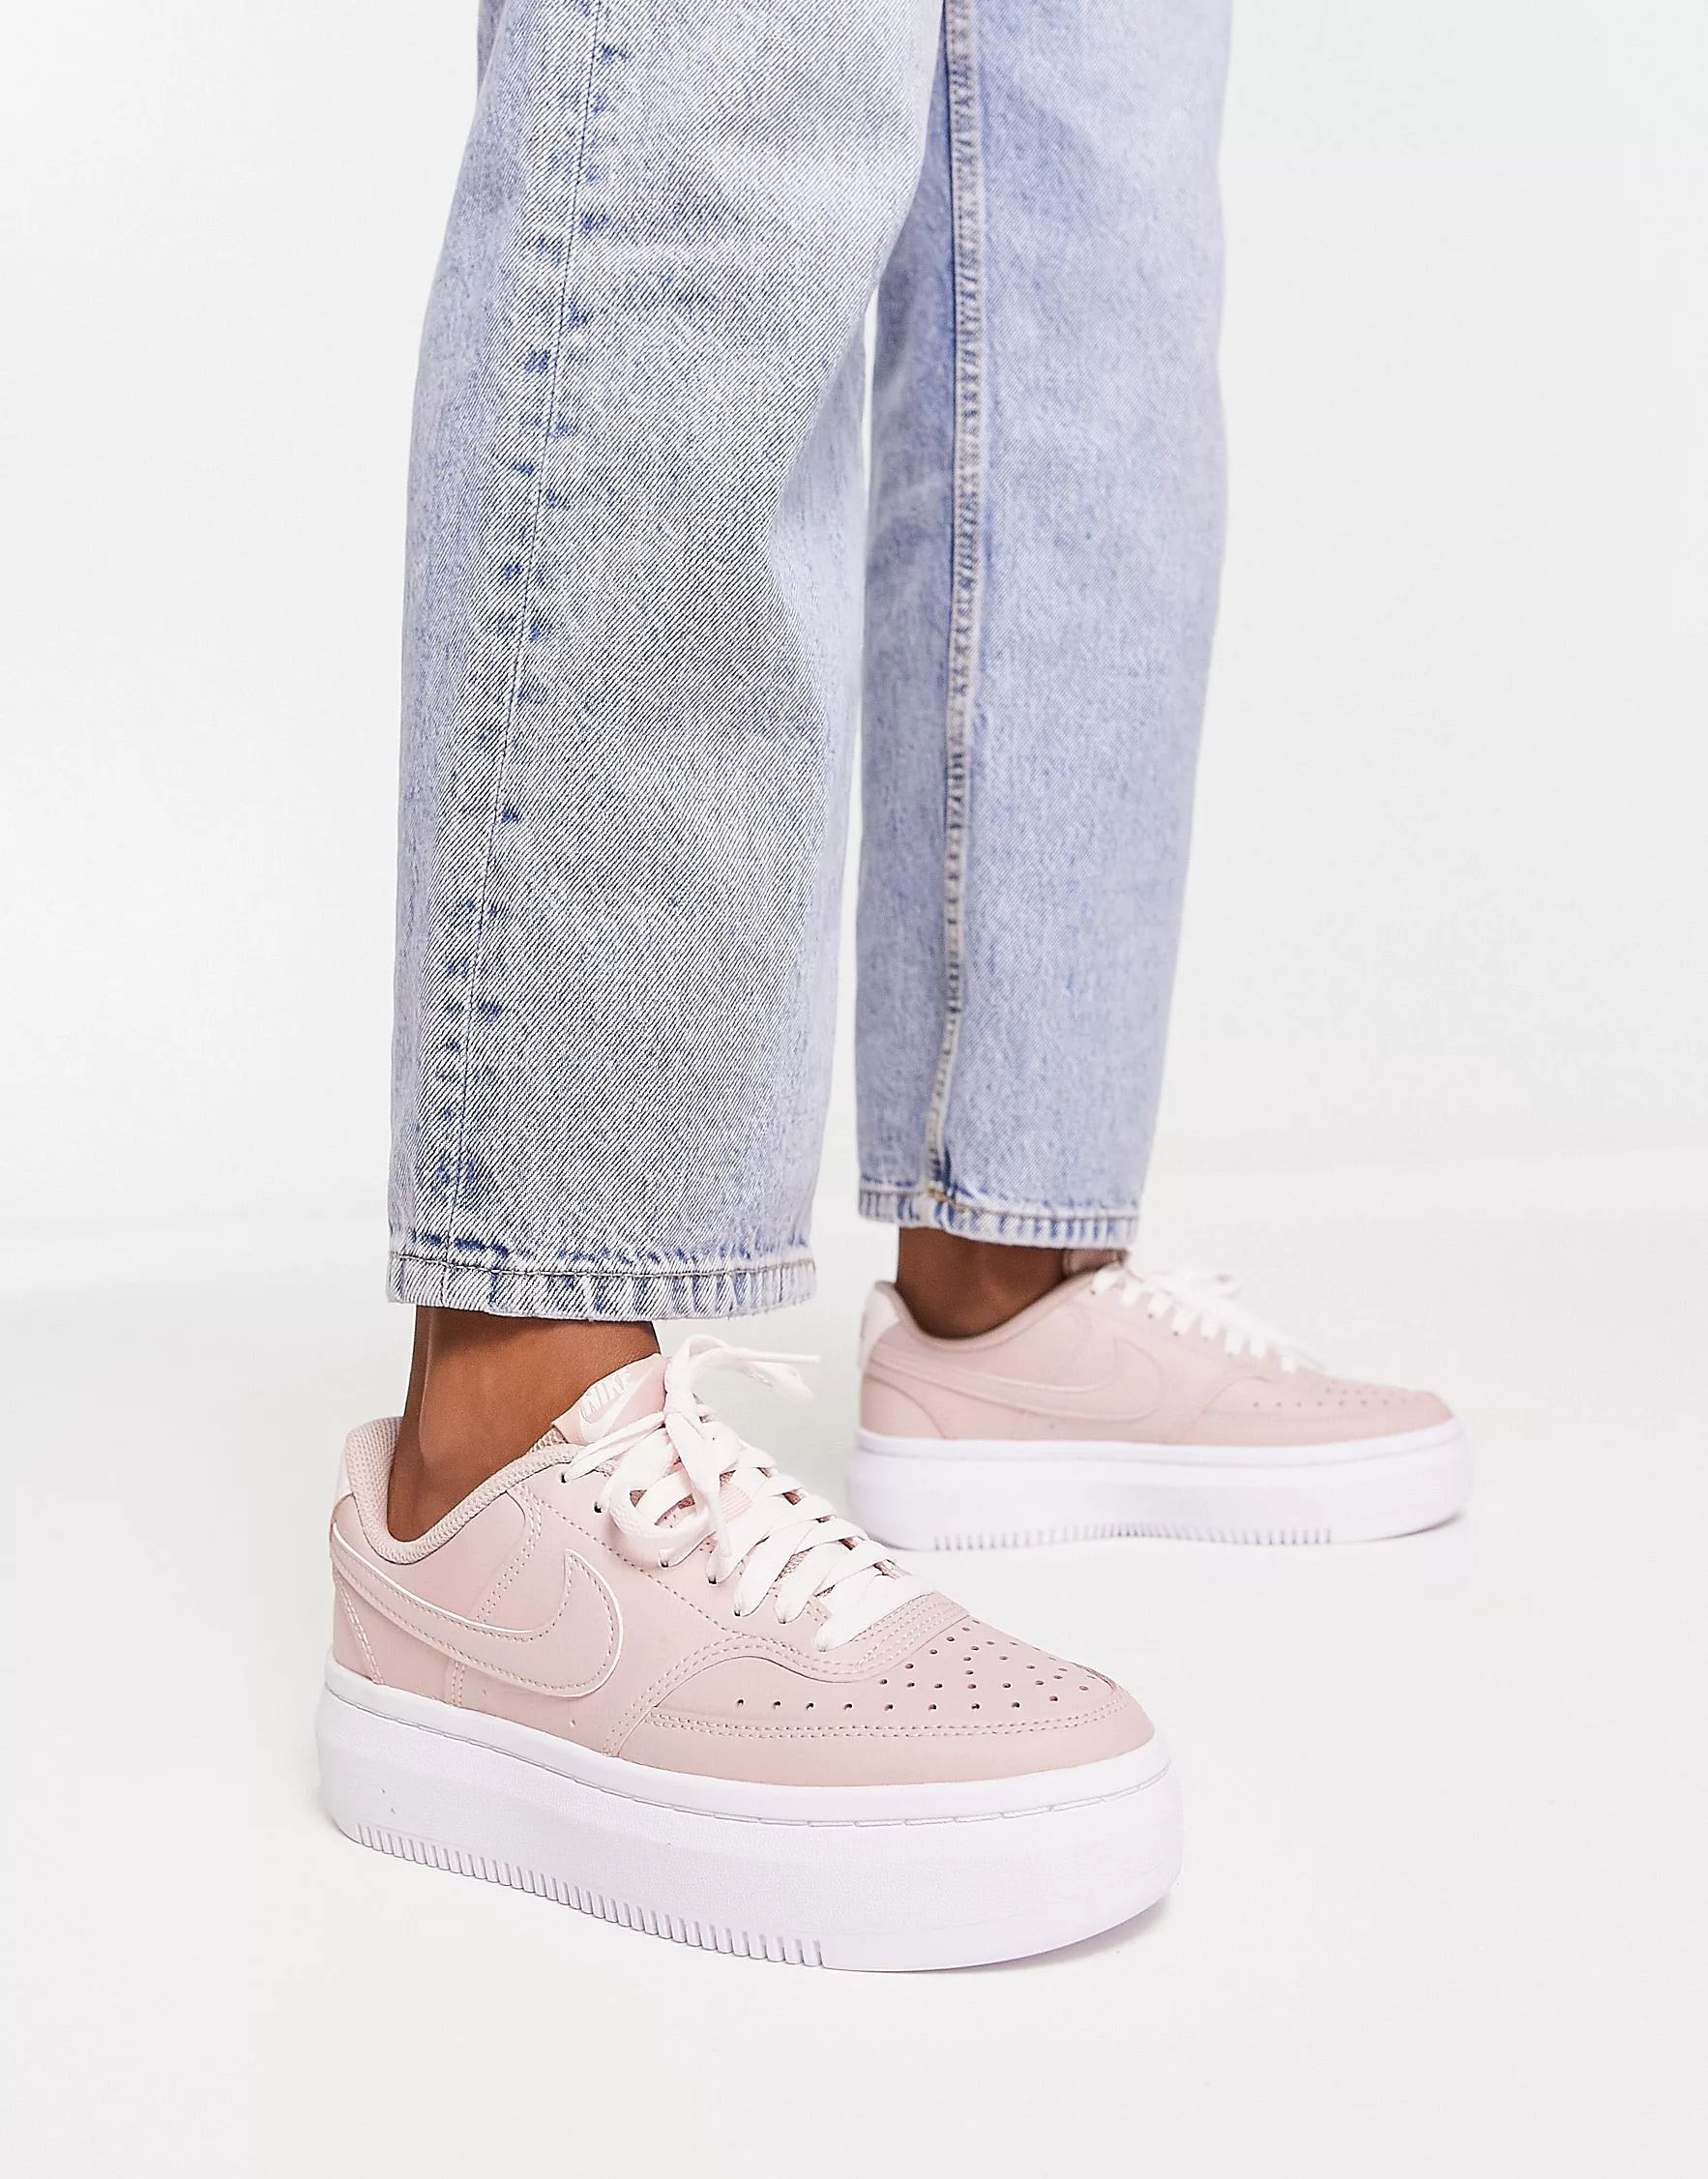 Nike Court Vintage sneakers in pink and white | ASOS (Global)